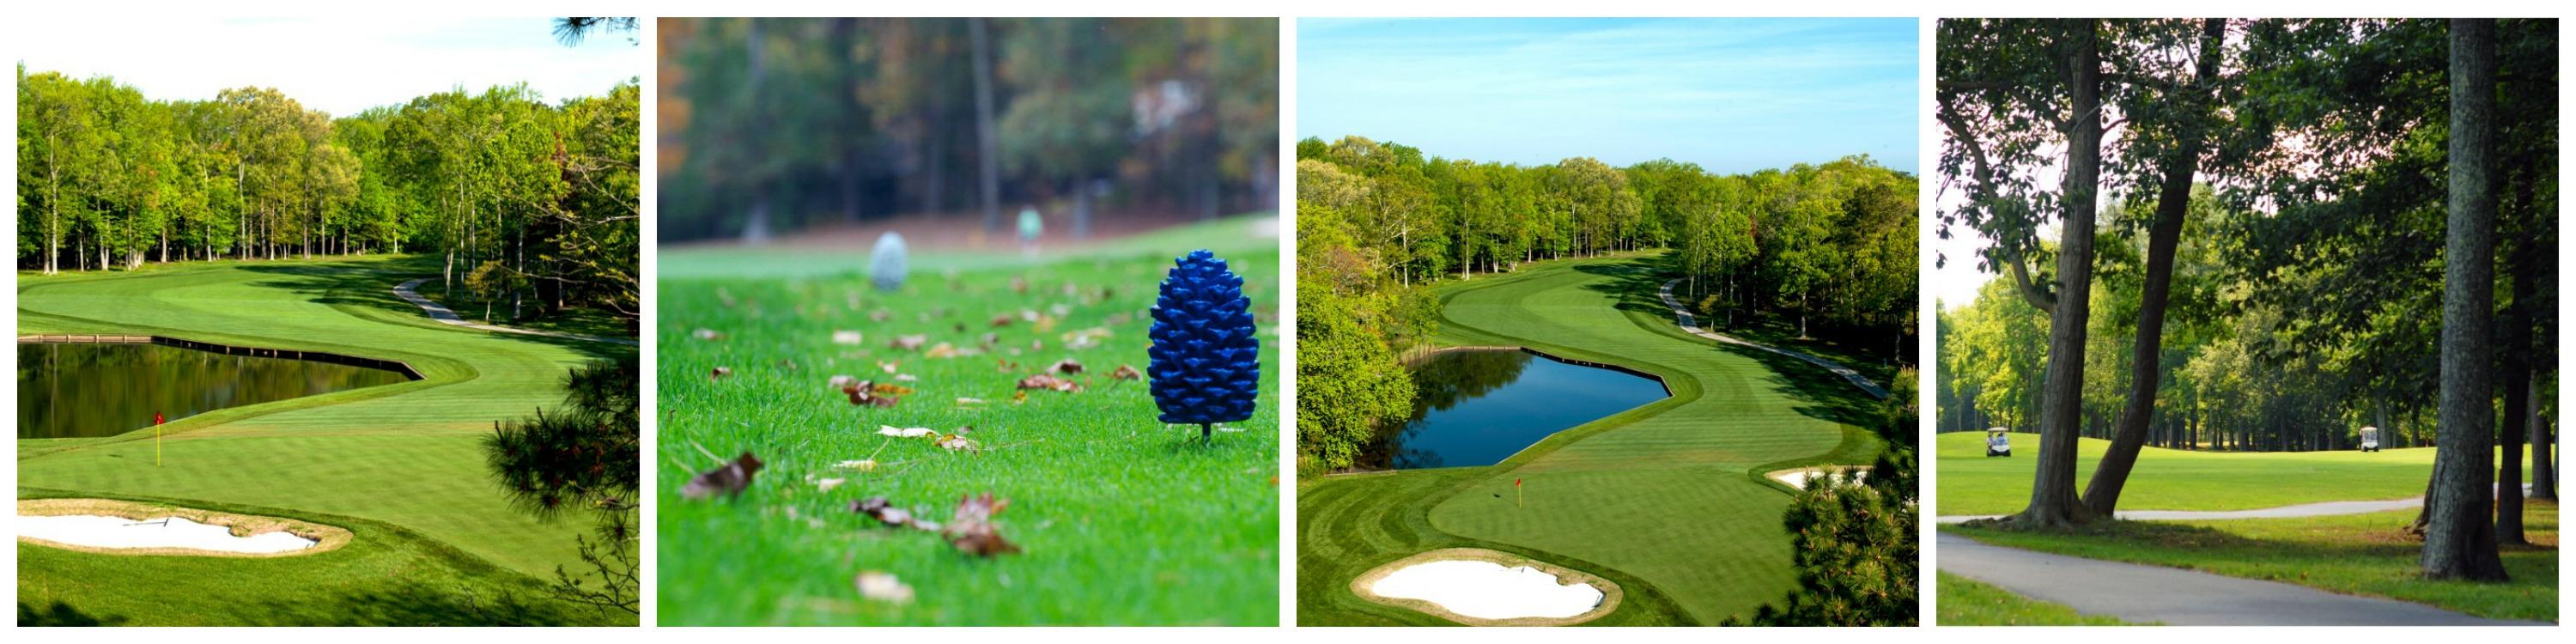 Golf Course Collage